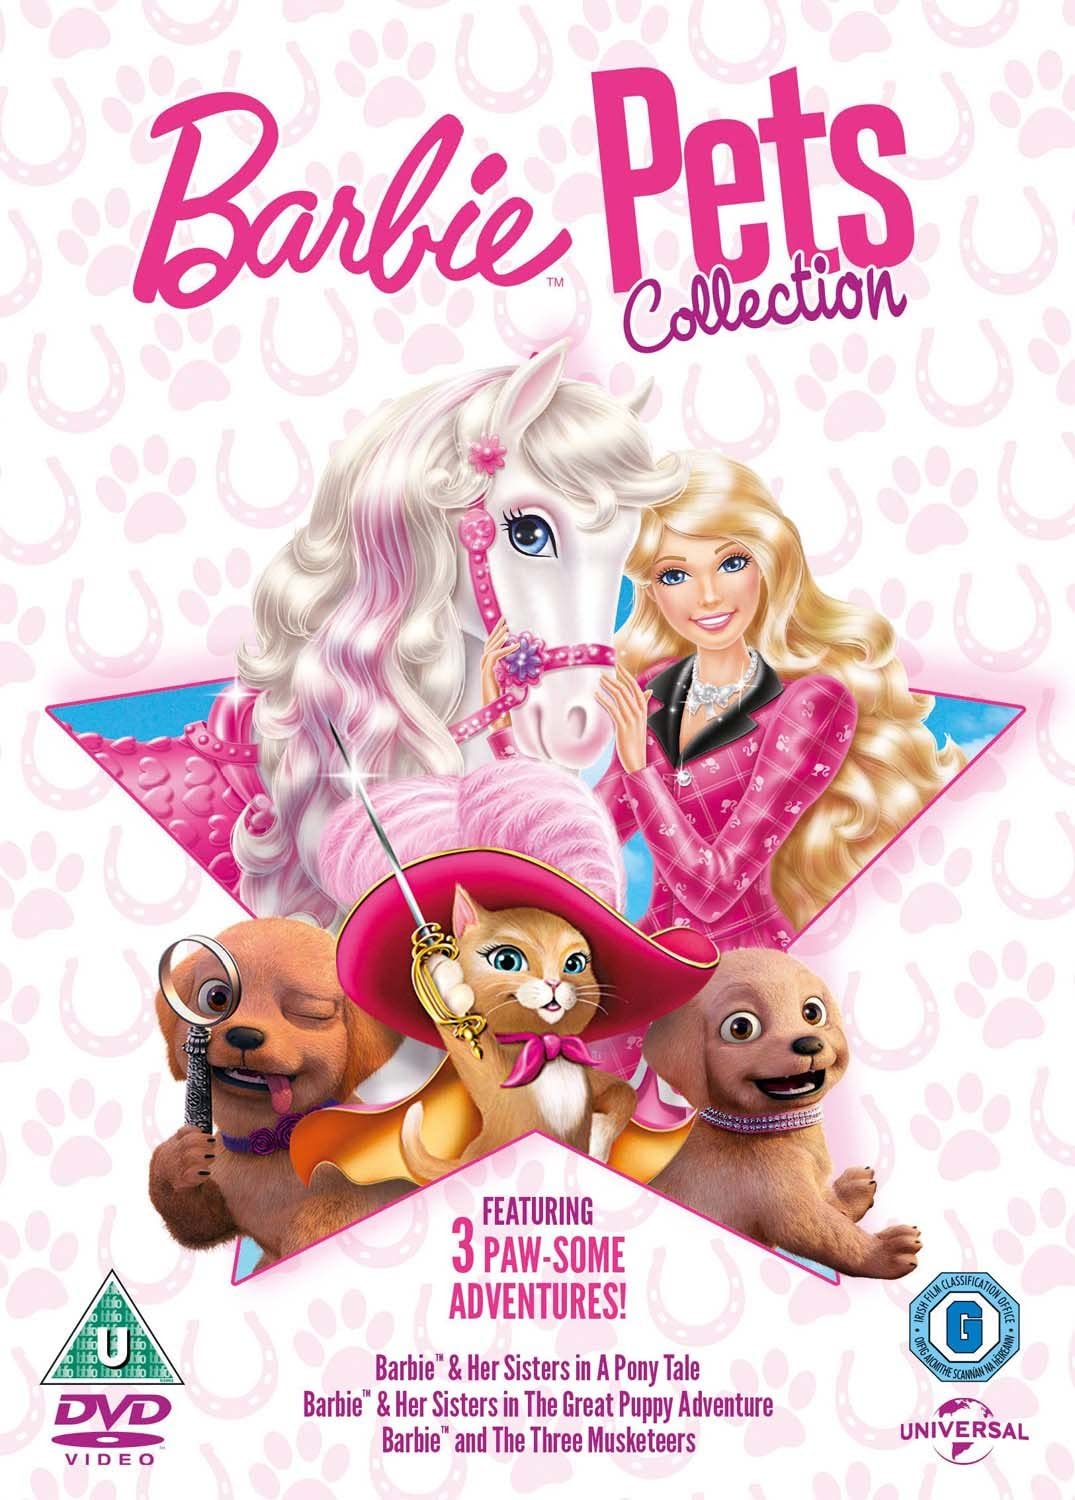 Barbie: Pets Collection (DVD)